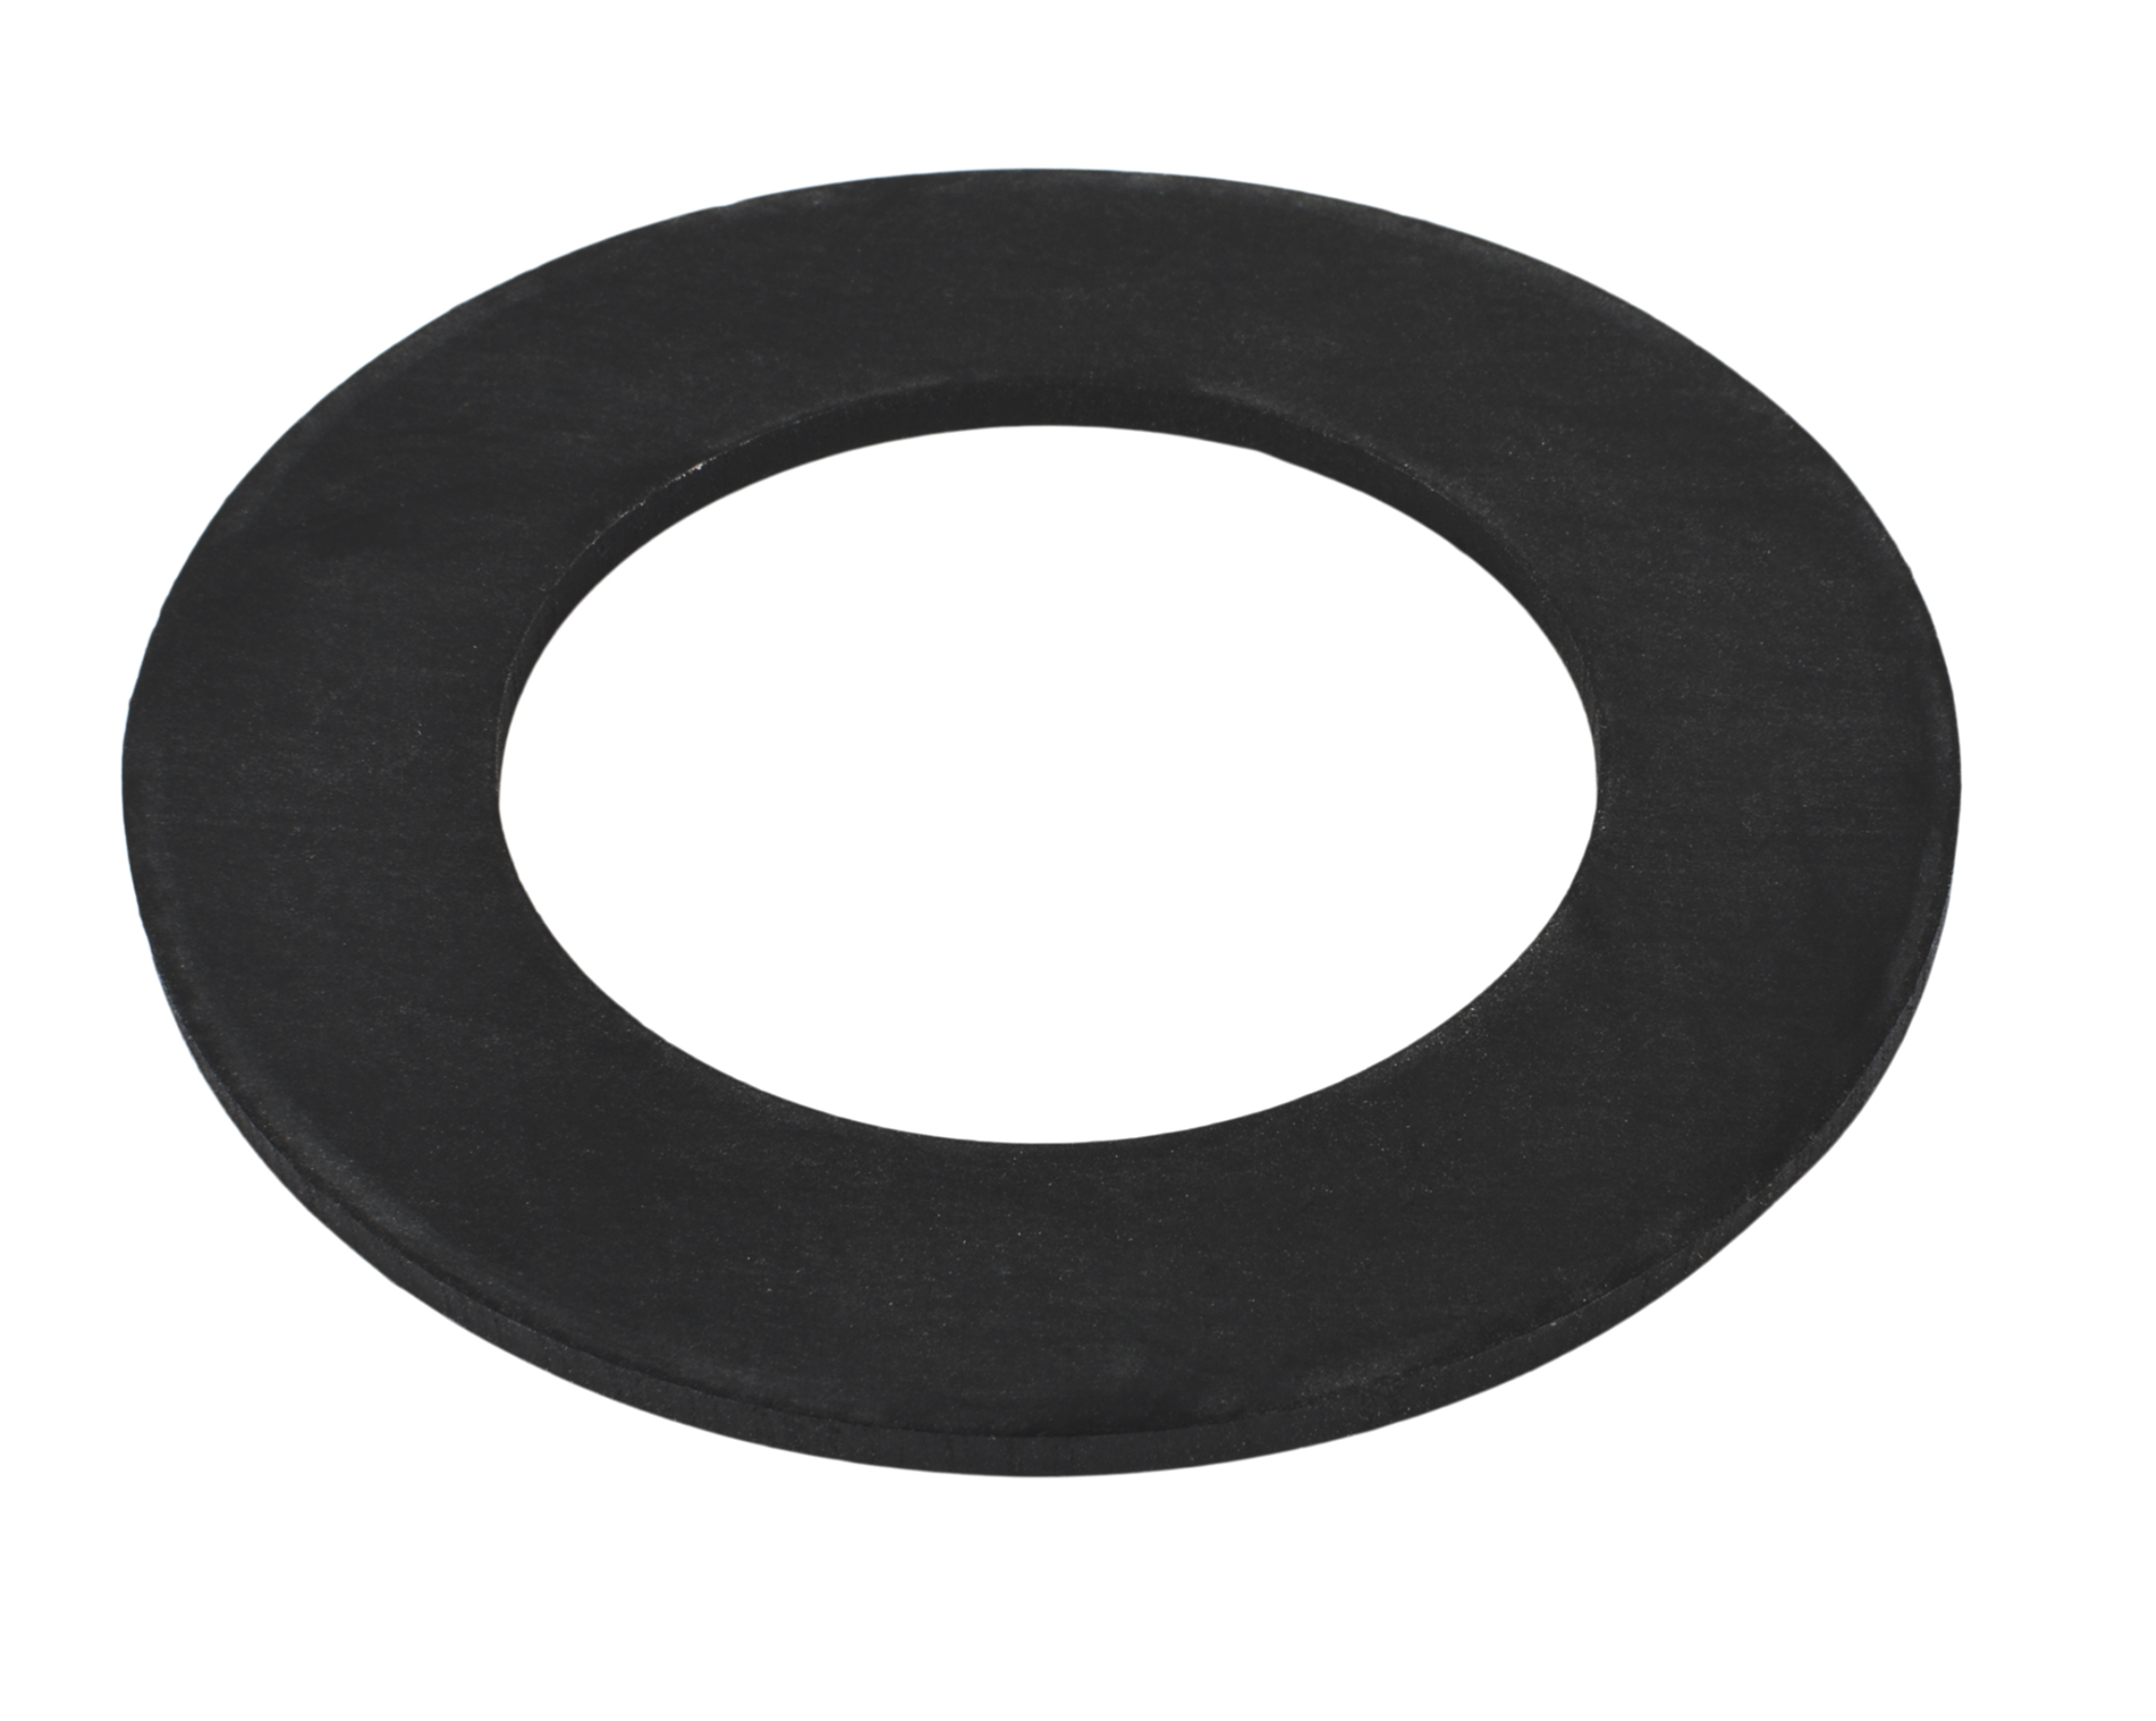 Joes Racing Products 19301 Drip Cup Washer, 2-1/2 in Outside Diameter, 1-1/2 in Inside Diameter, 3/32 in Thick, Rubber, Black, Each